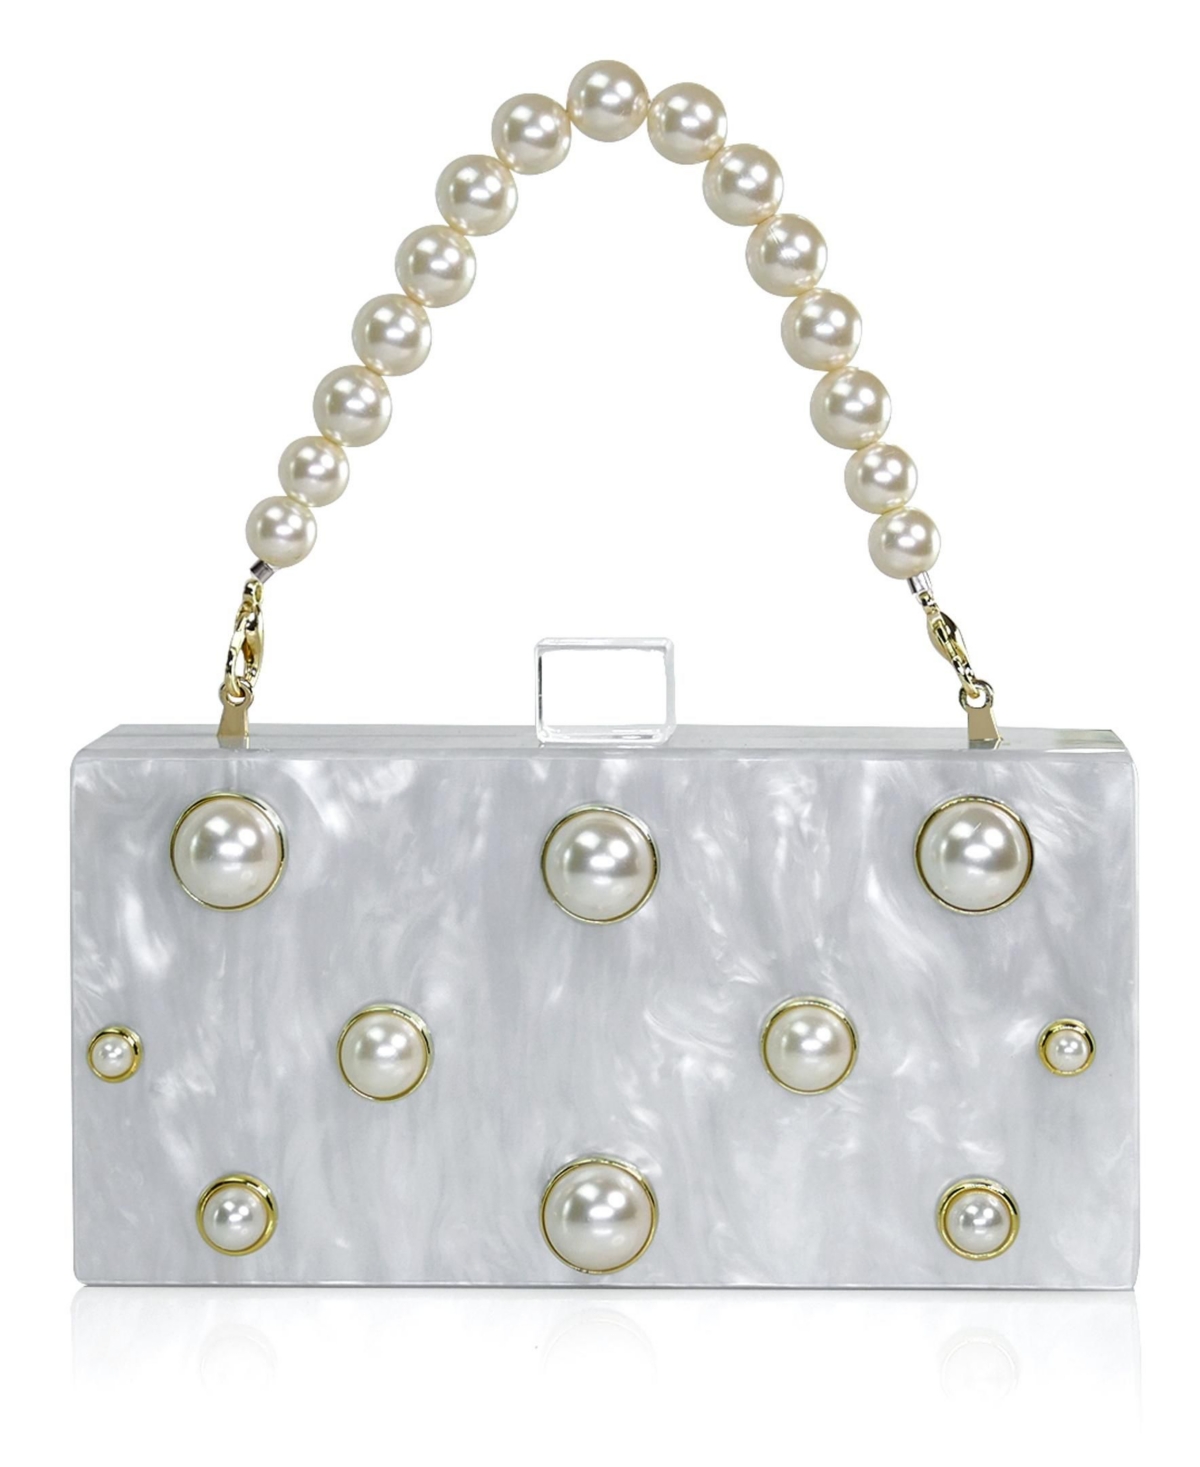 Embellished Acrylic Clutch with Top Handle - White